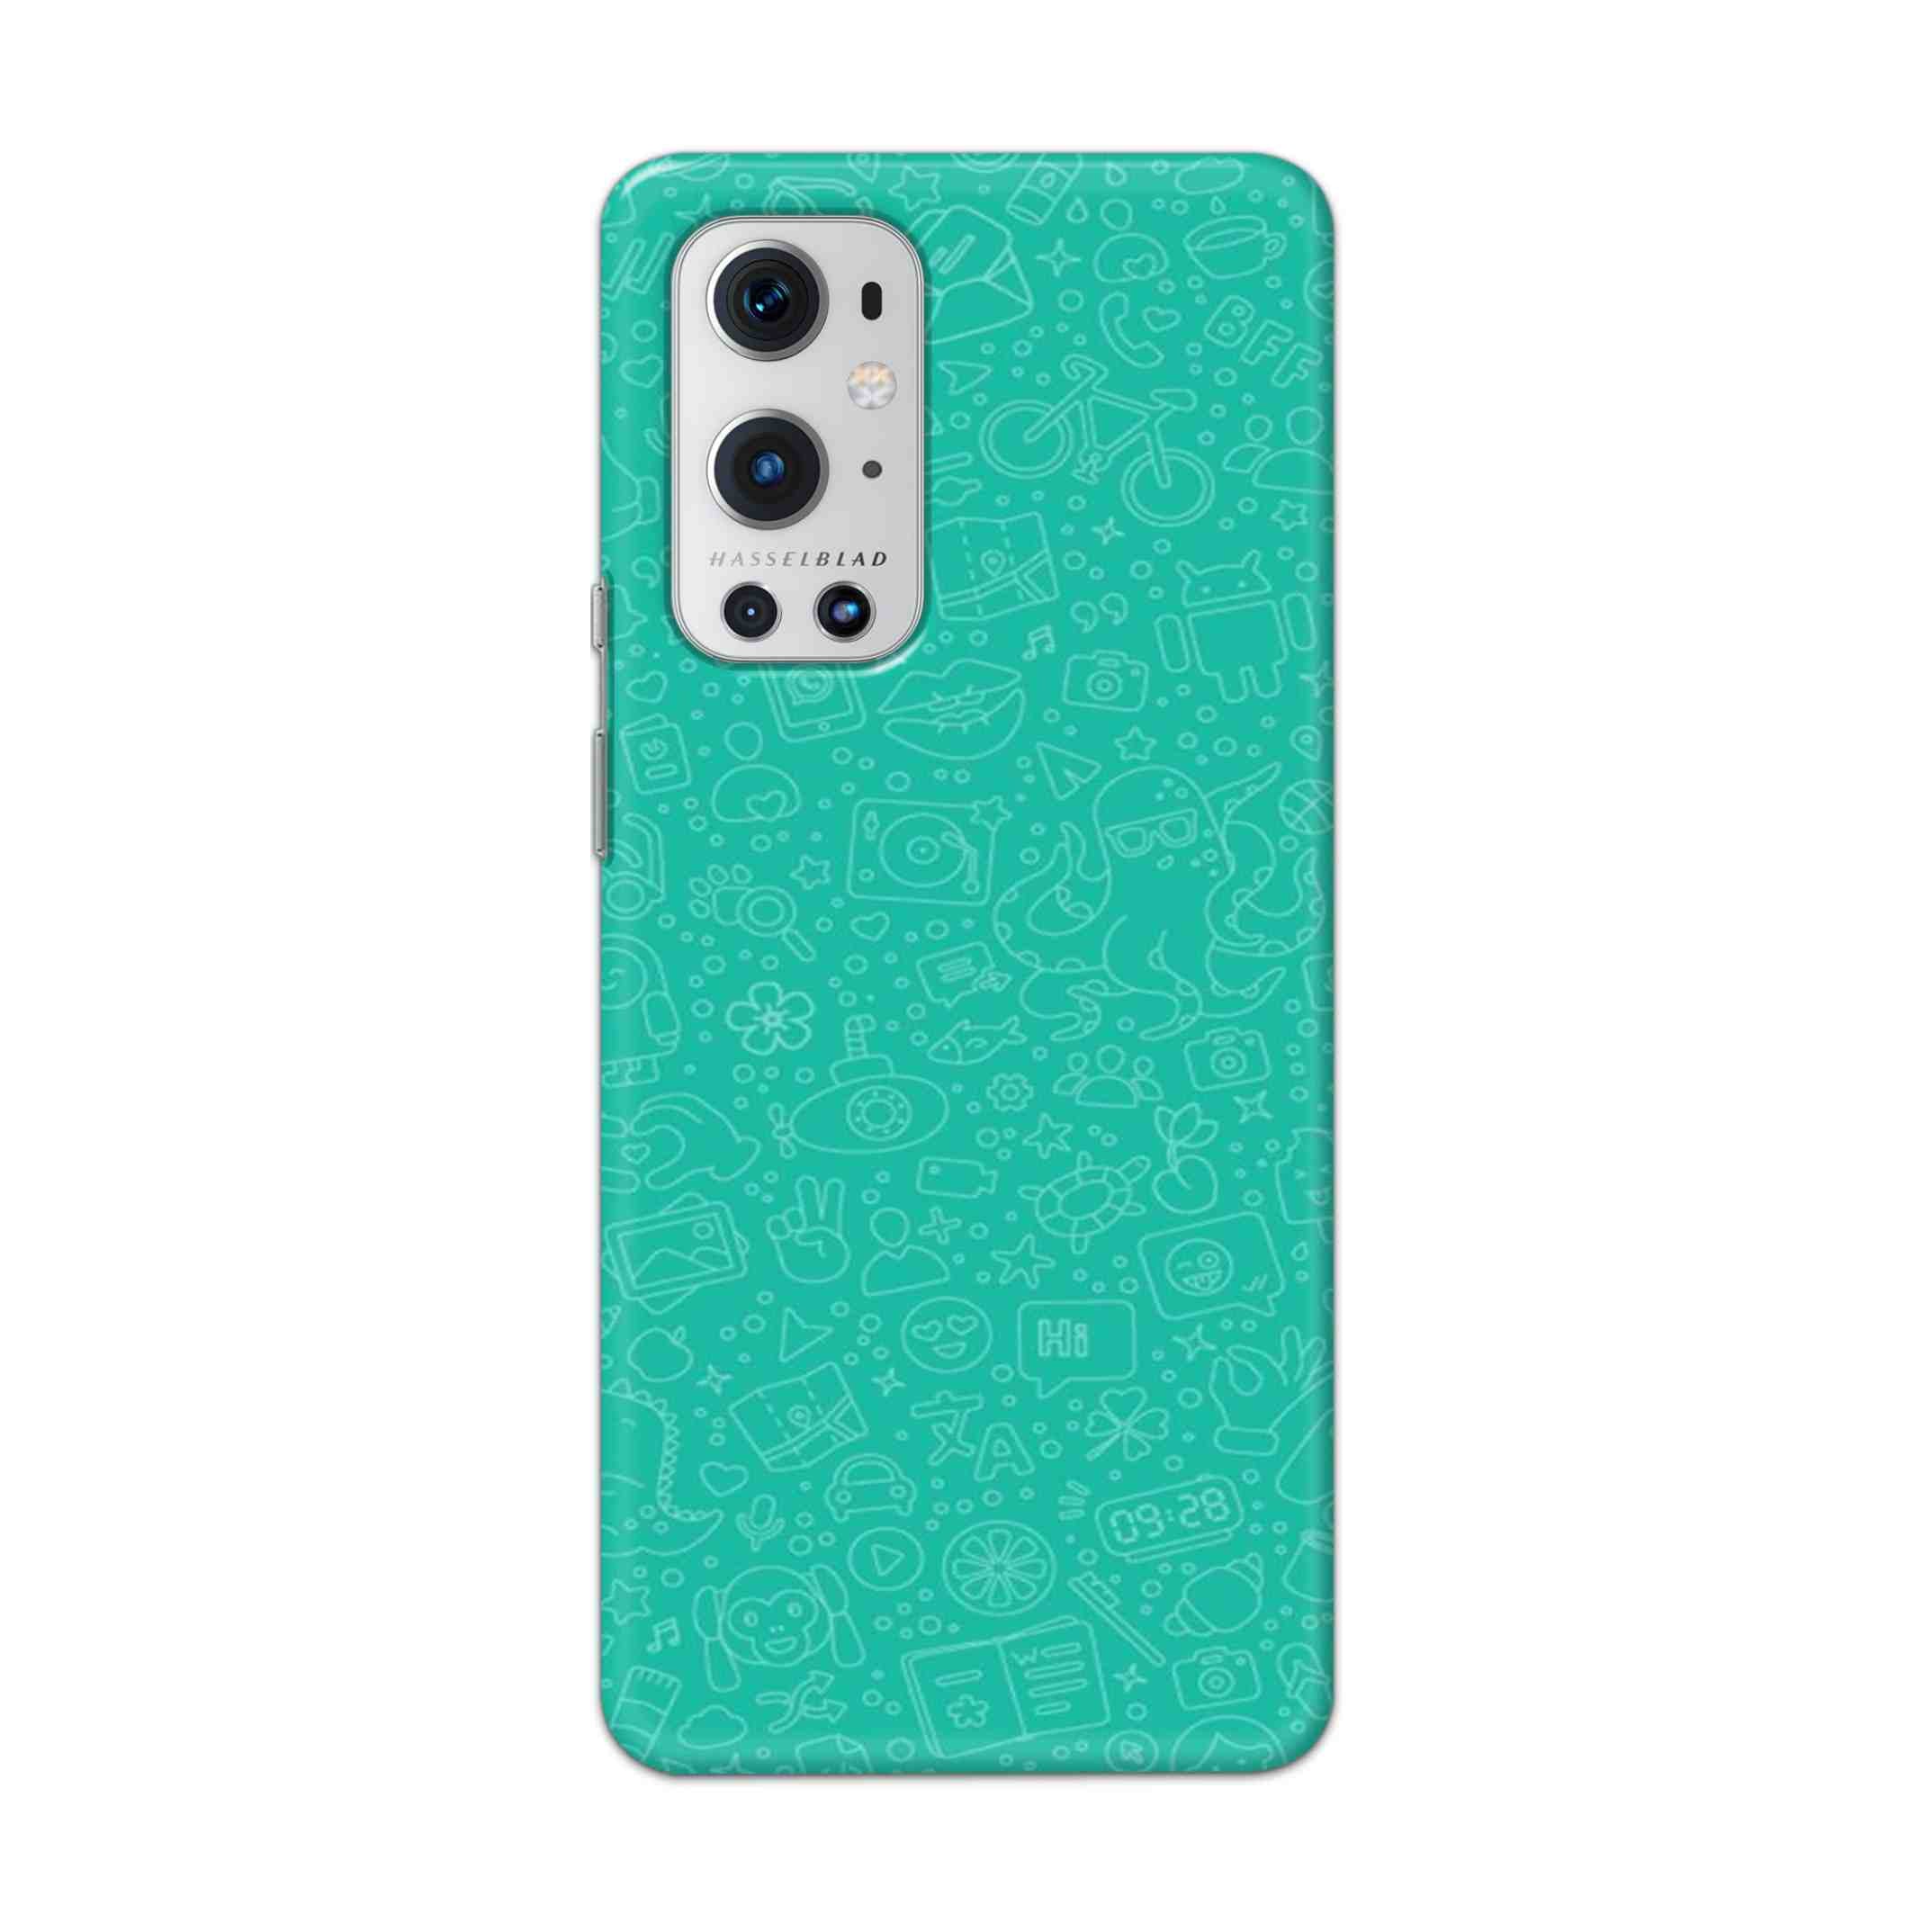 Buy Whatsapp Hard Back Mobile Phone Case Cover For OnePlus 9 Pro Online